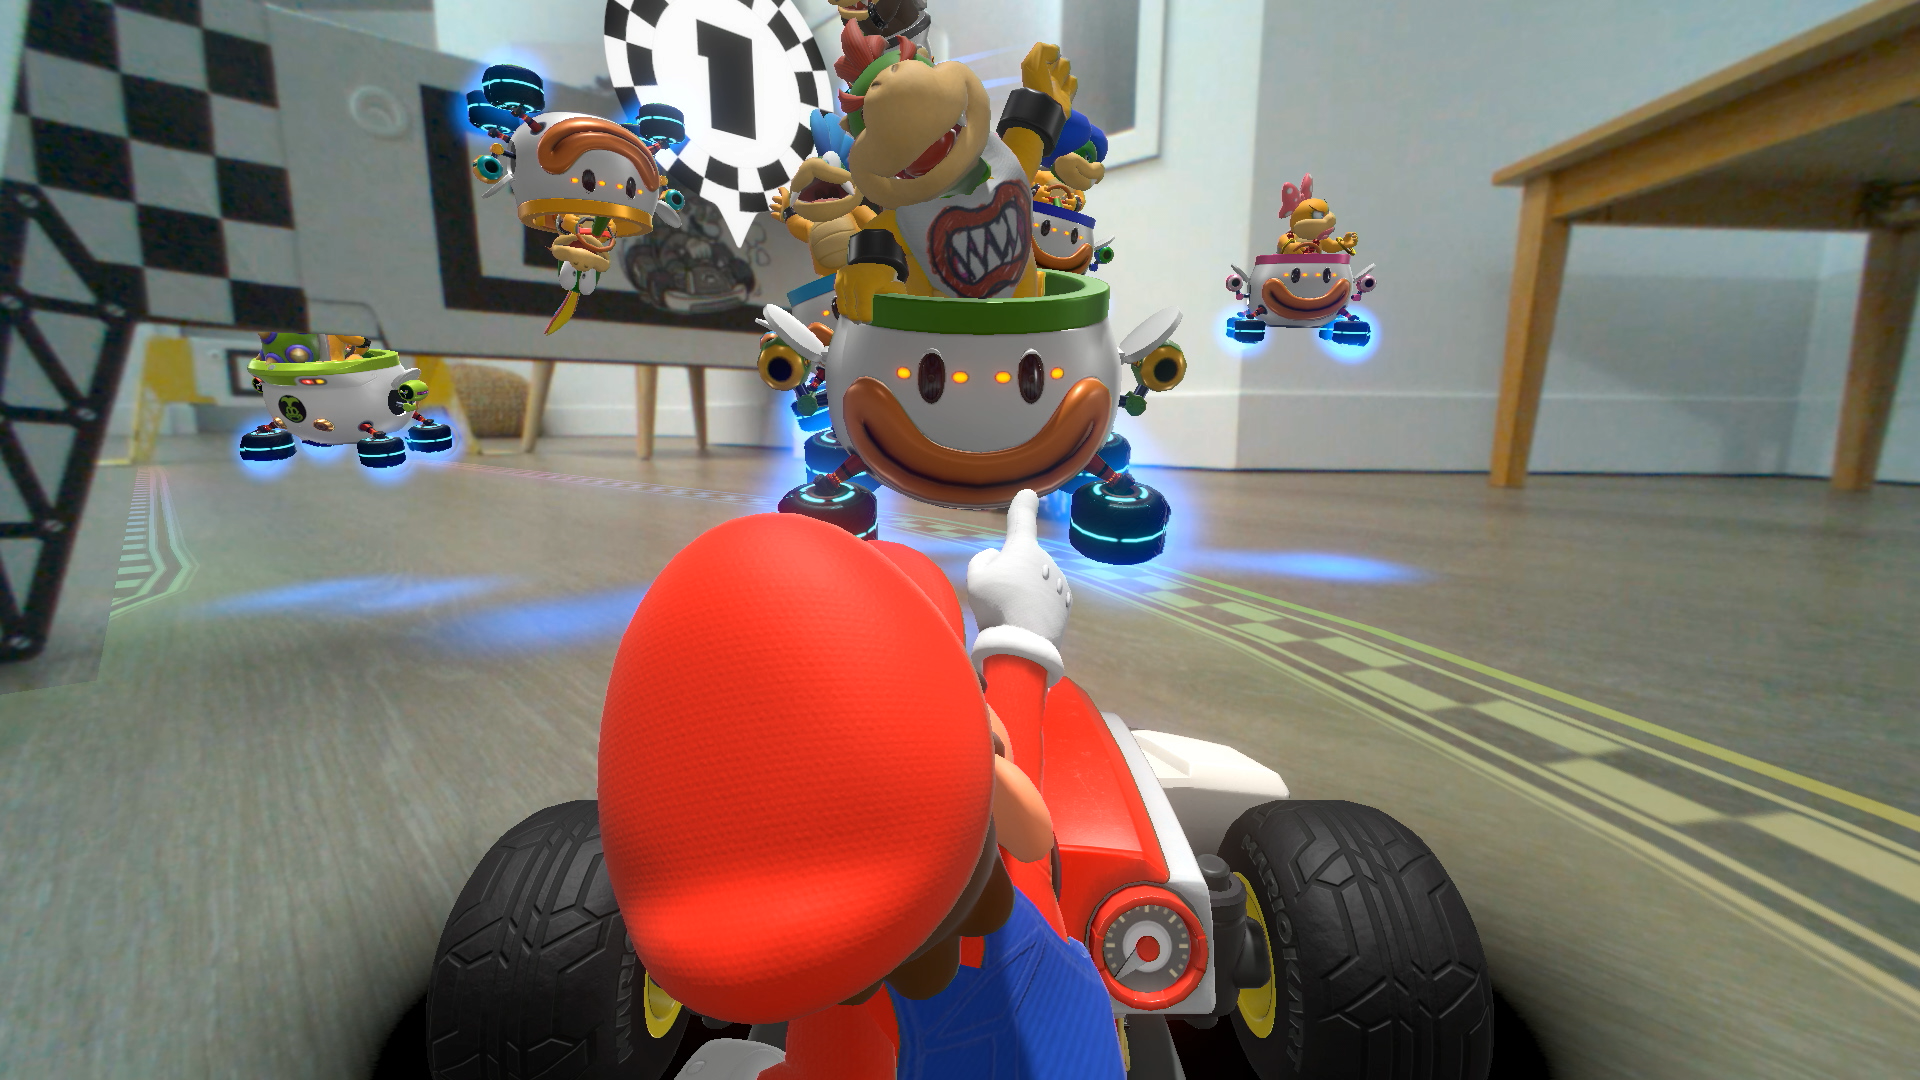 Mario Kart' is 30 years old, if you can believe that